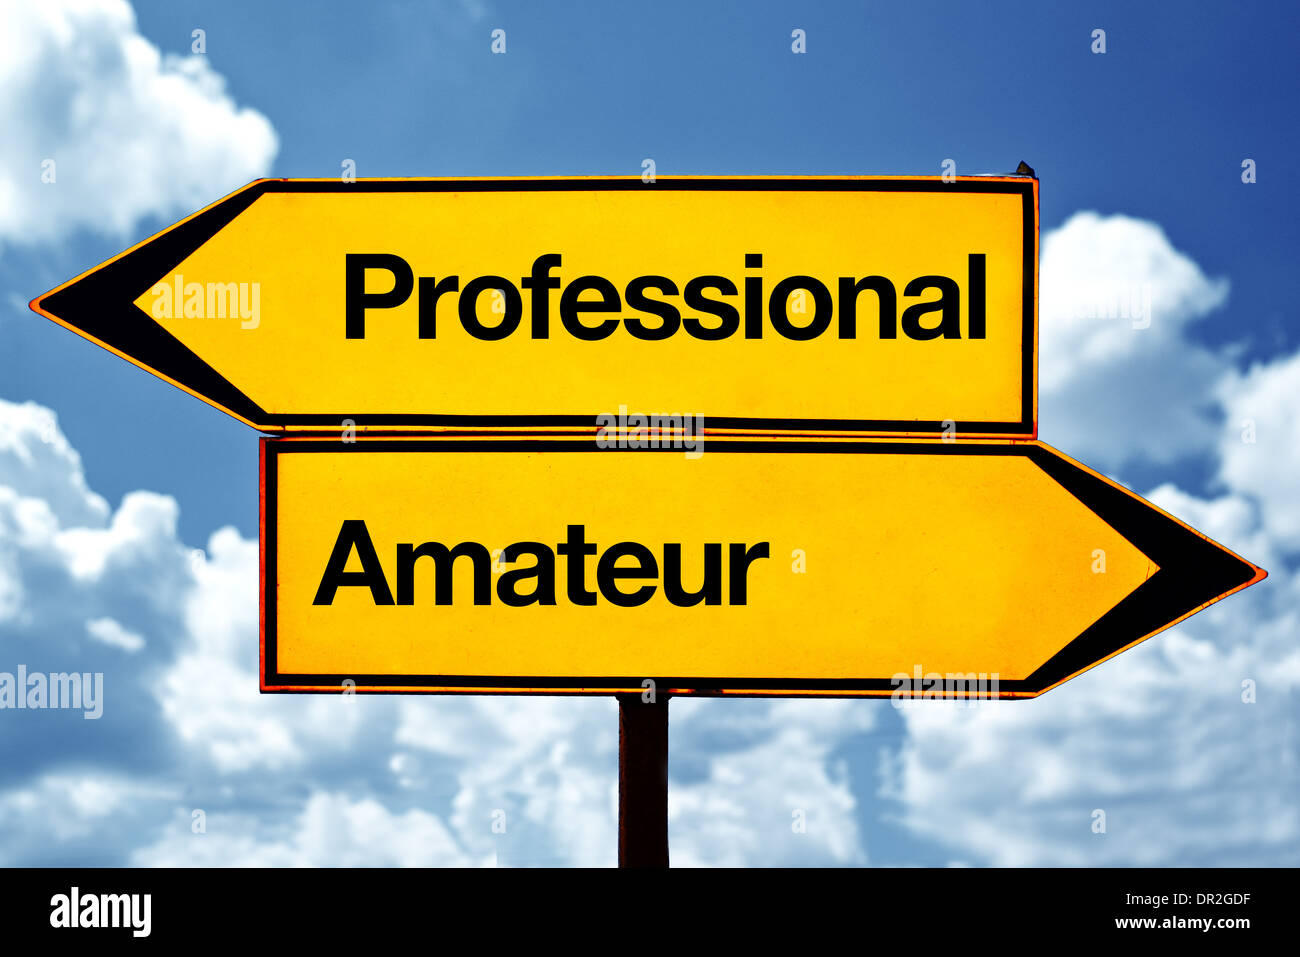 Professional or amateur opposite signs. Two opposite road signs against blue sky background. Stock Photo